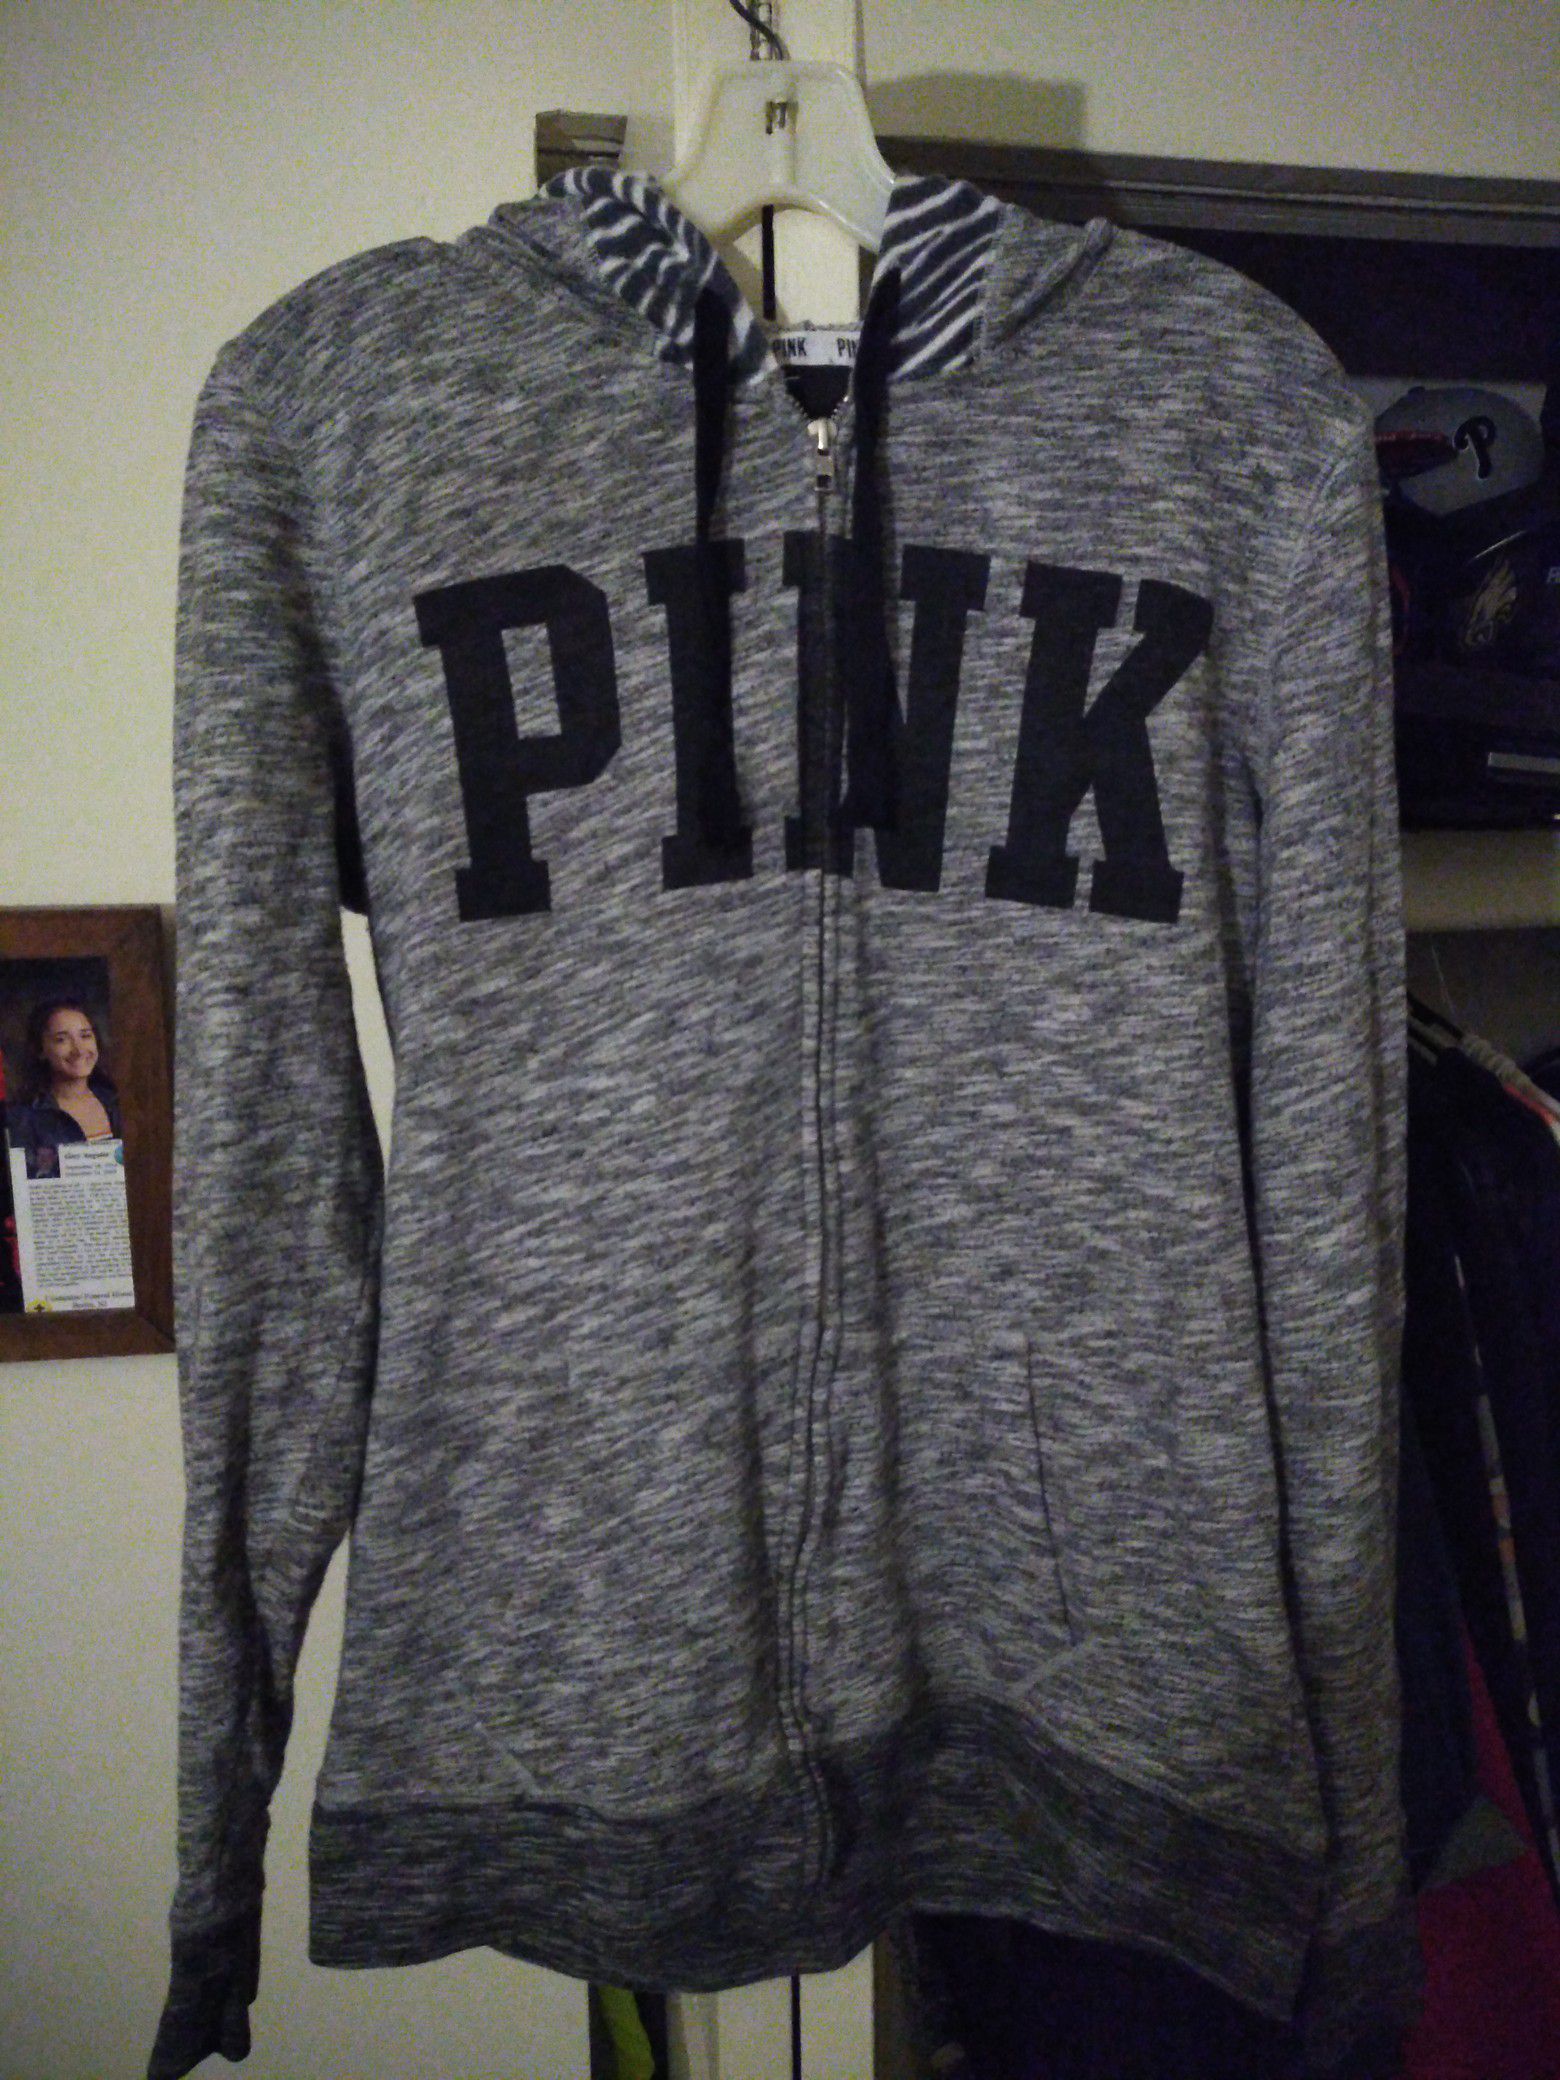 NWOT Victoria Secrets PINK gray hoodie with white and black logo decals. Size small $45